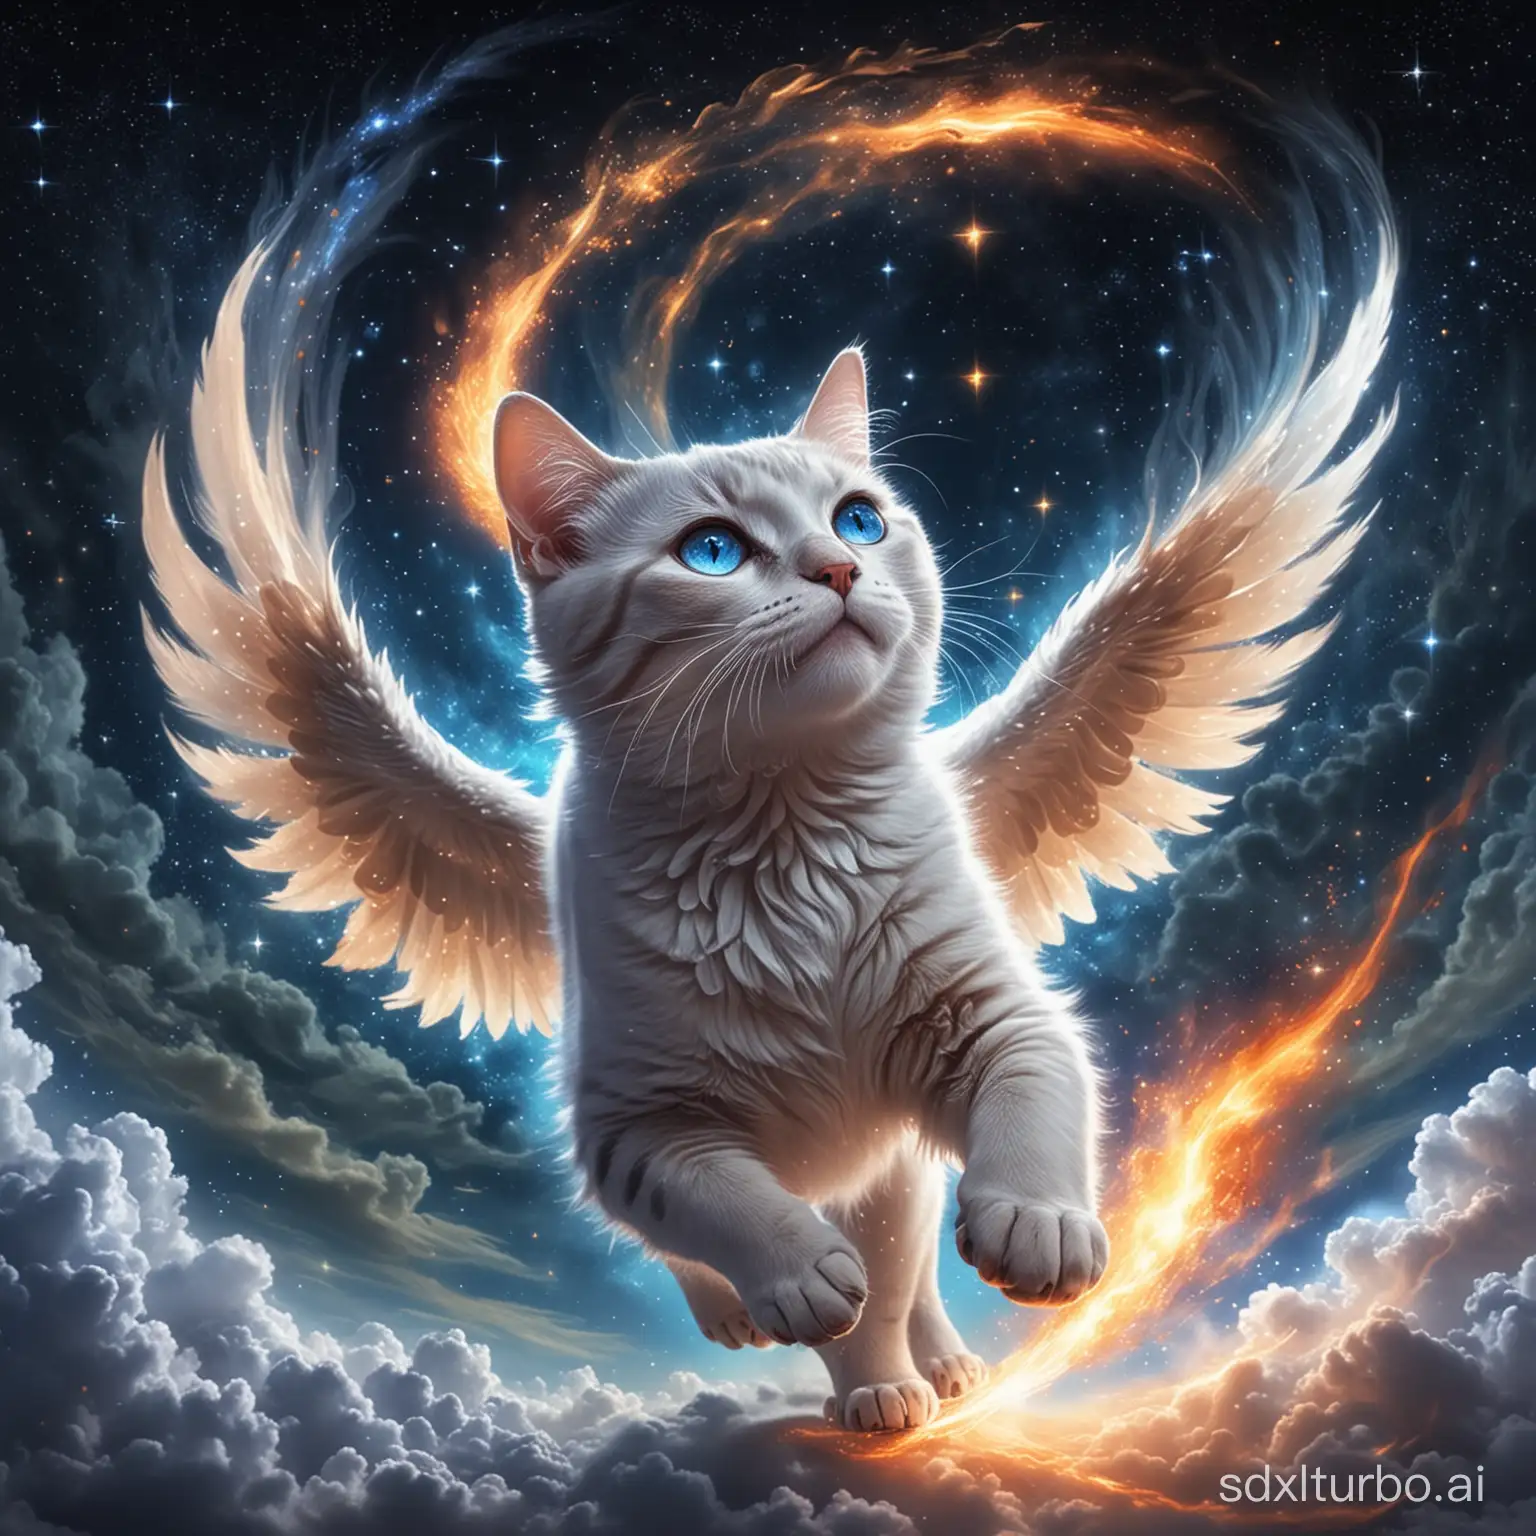 A cat with one wing, running in the starry sky, with a horn on its head, deep blue eyes, breathing fire, and its body transparent like crystal.